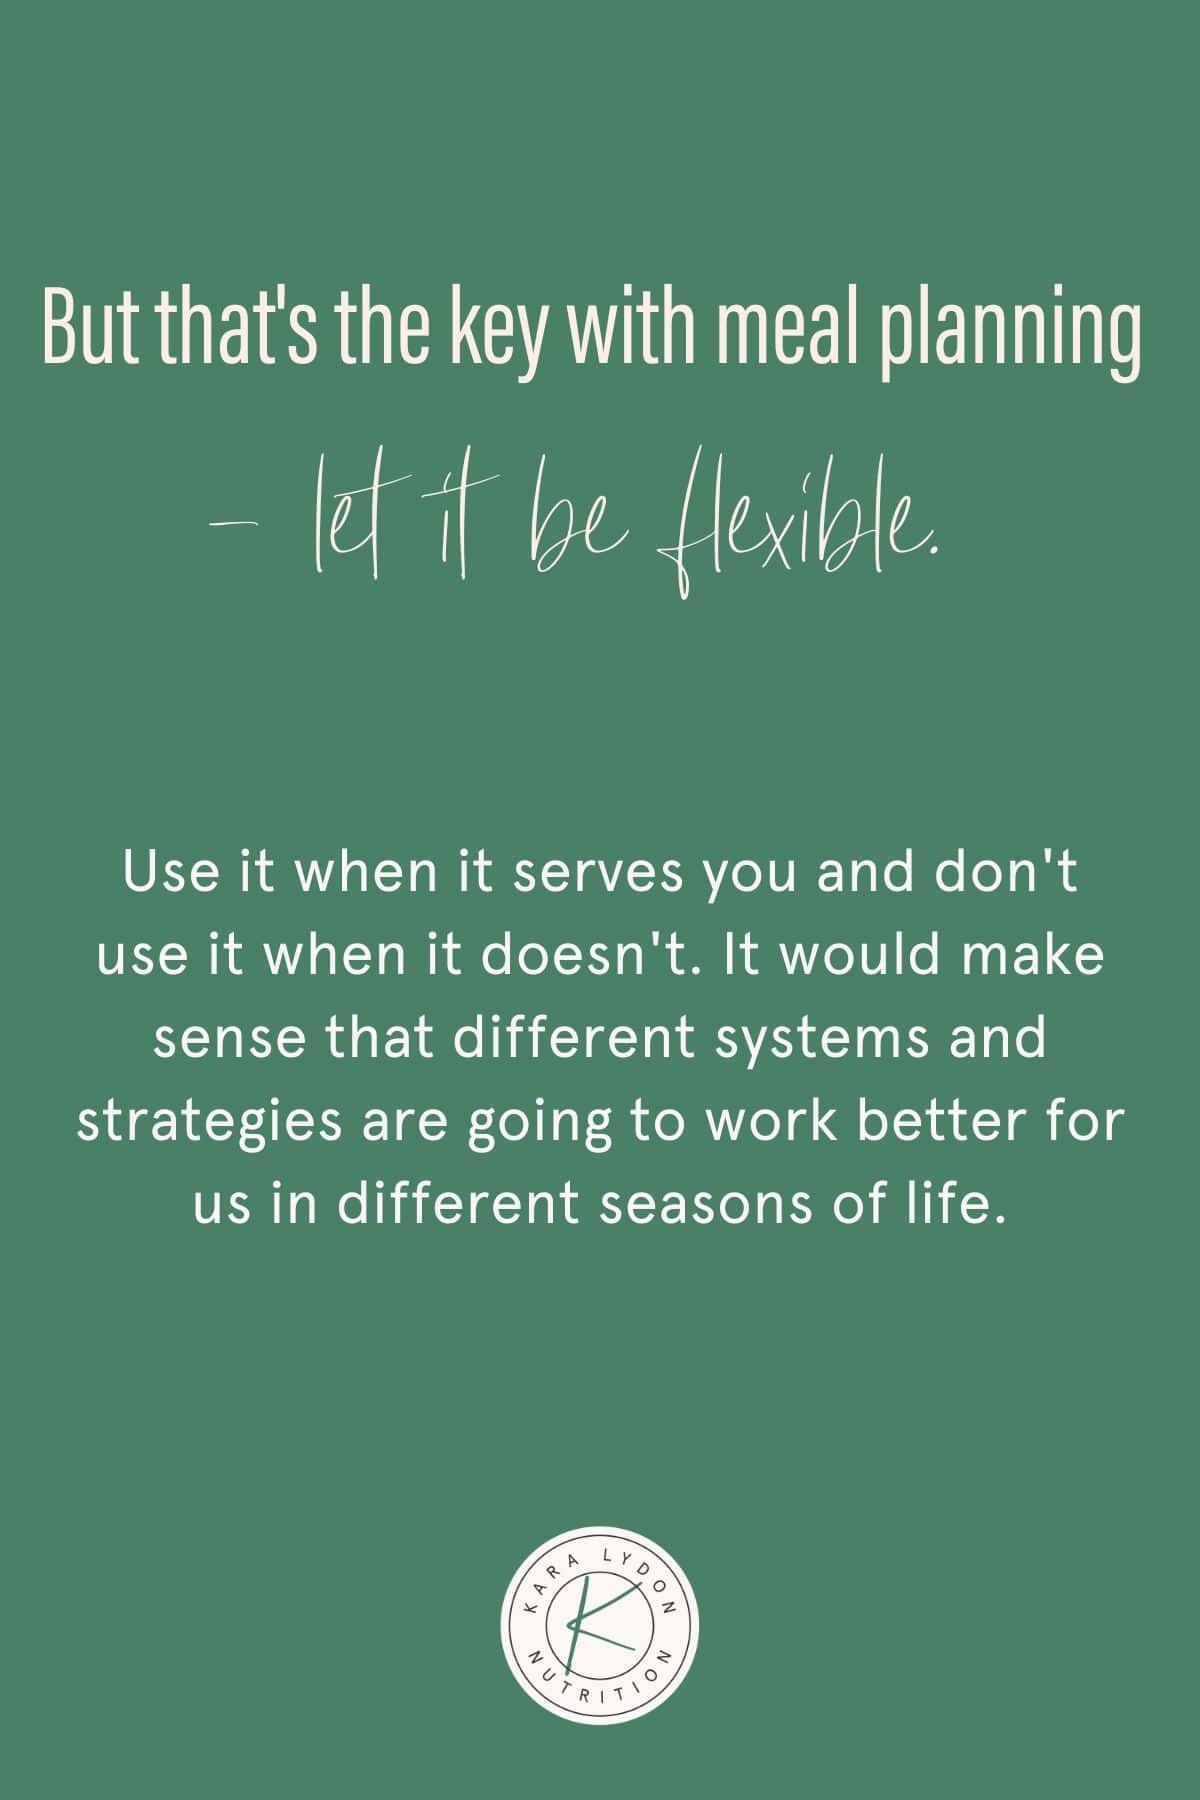 Graphic with quote: "But that's the key with meal planning - let it be flexible. Use it when it serves you and don't use it when it doesn't. It would make sense that different systems and strategies are going to work better for us in different seasons of life."